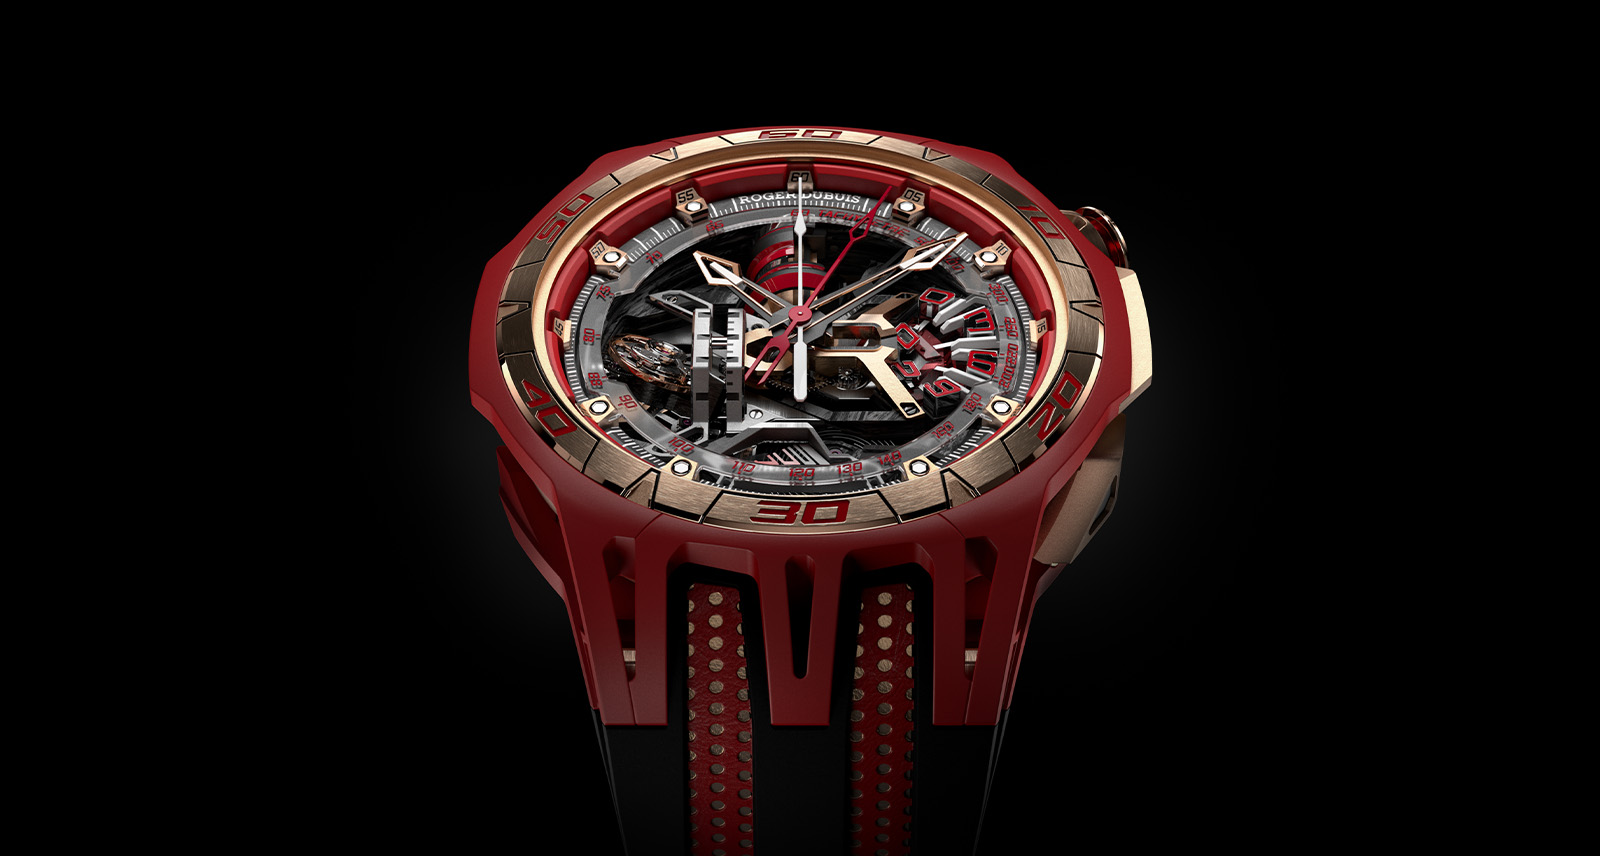 Roger dubuis watches